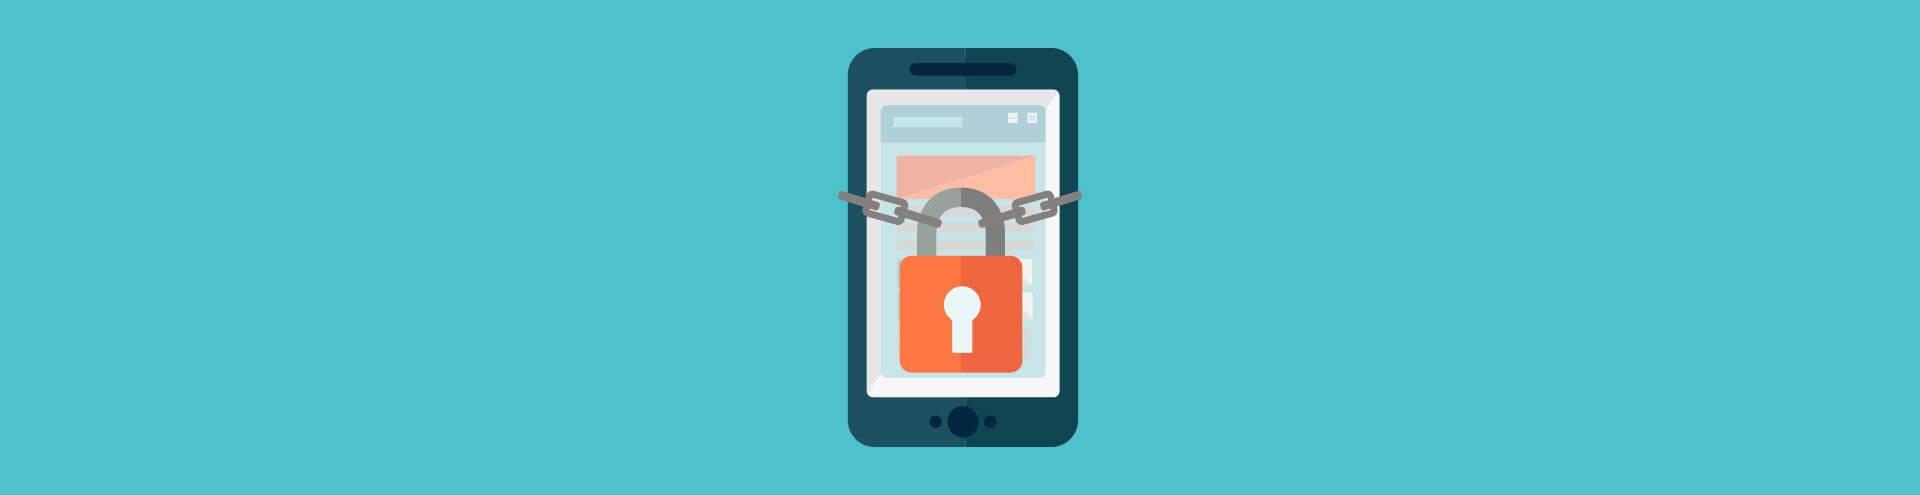 Mobile App Security Standards: Common Risks and Solutions